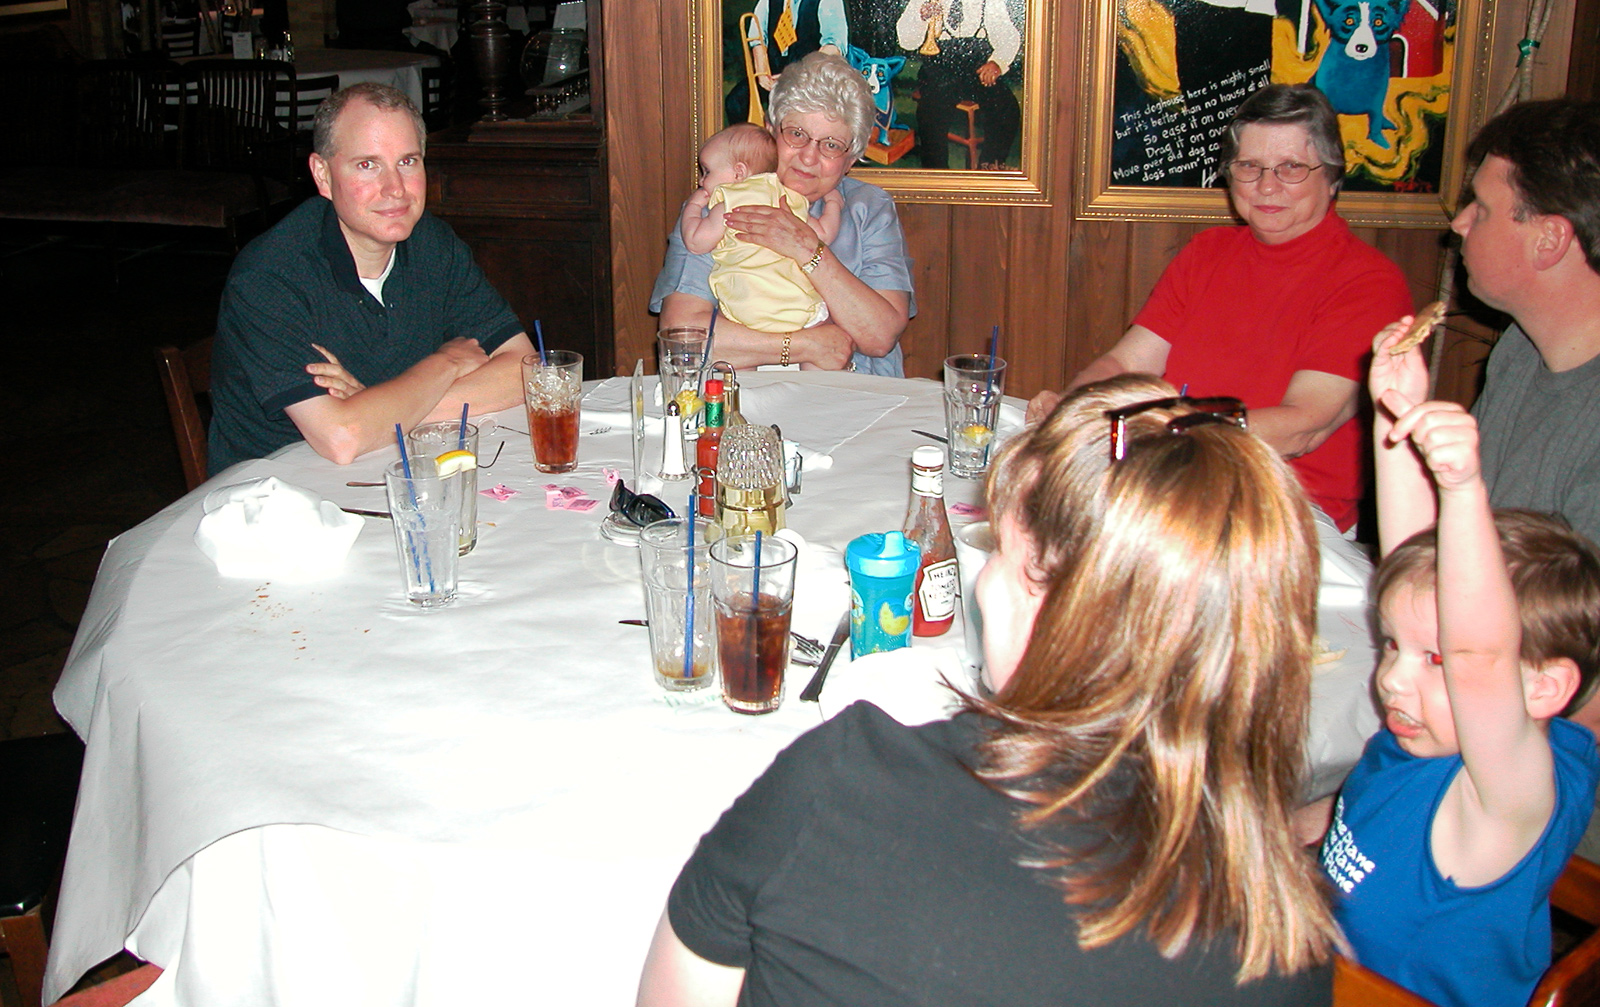 Marc, Mom holding Rhianna, Aunt Dory, Rochelle holding Miles, and Paul helping Marc celebrate his Birthday at the BLUE DOG® restaurant in Lafayette